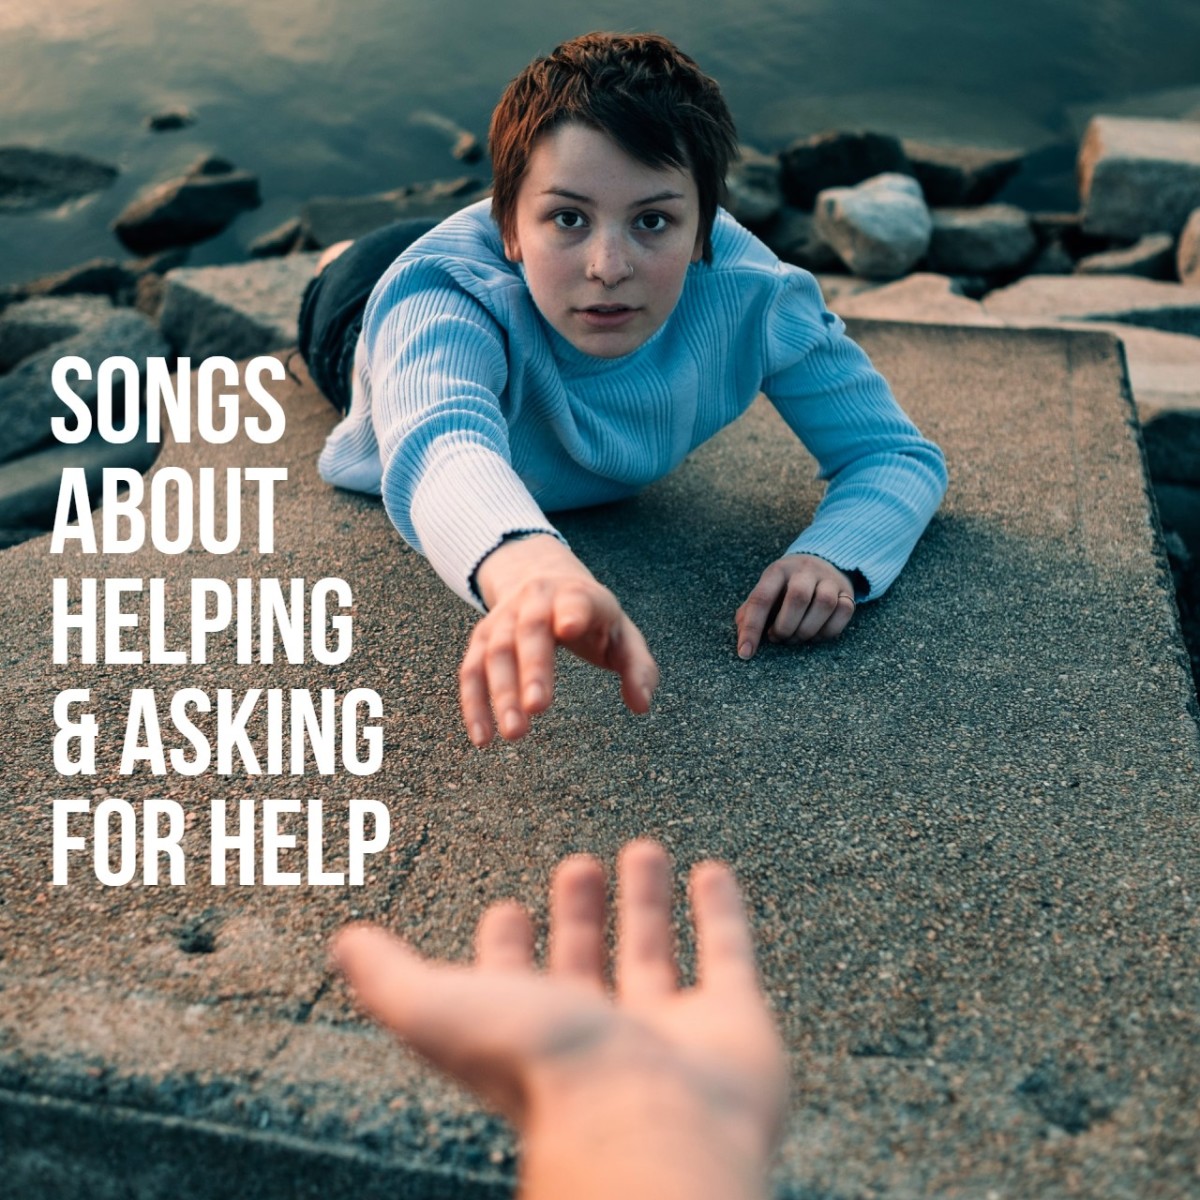 77 Songs About Helping Others or Asking for Help